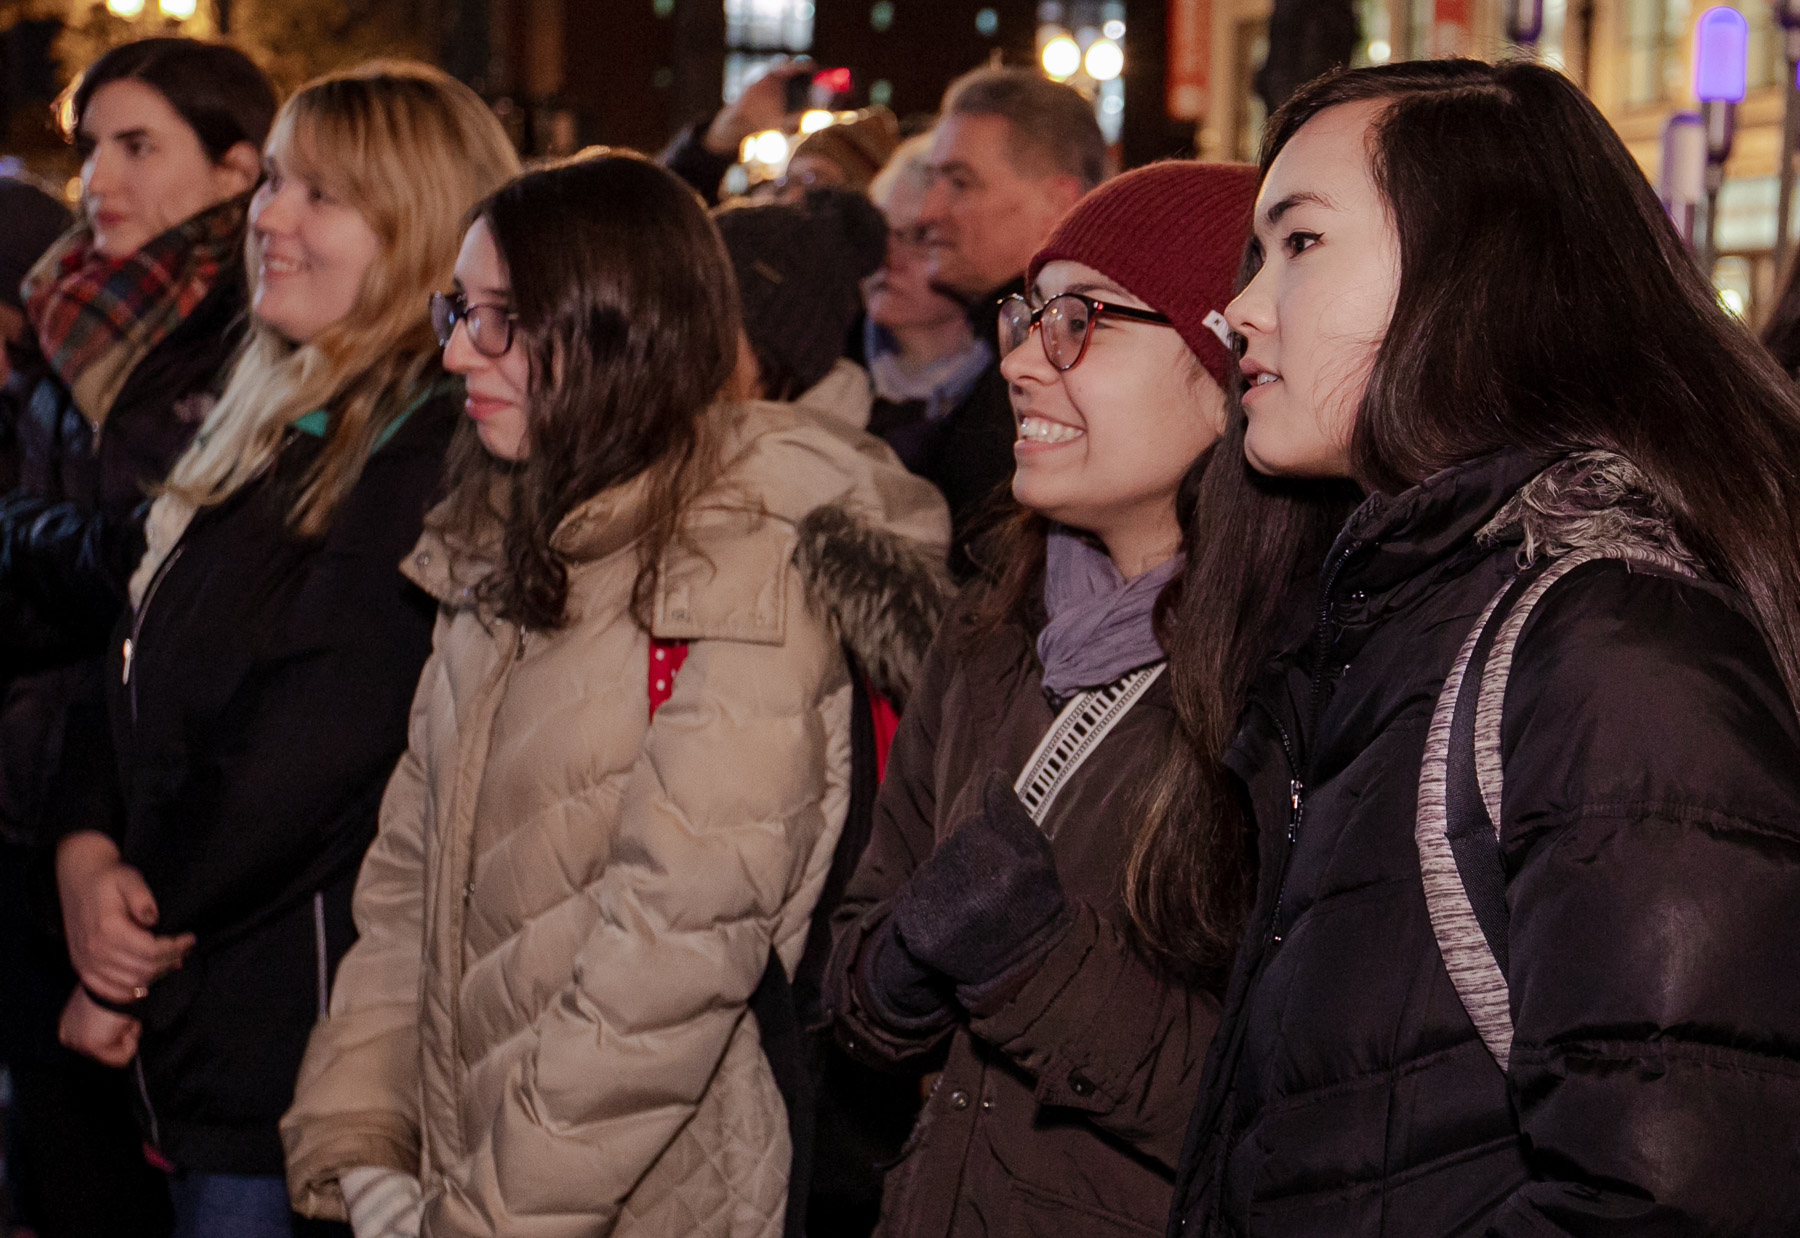 Students, faculty and staff watch the stop-motion film after its debut on State Street. The Merry Christmas from DePaul window utilizes state-of-the-art technology to build an imaginative, 3-D experience. (DePaul University/Randall Spriggs)